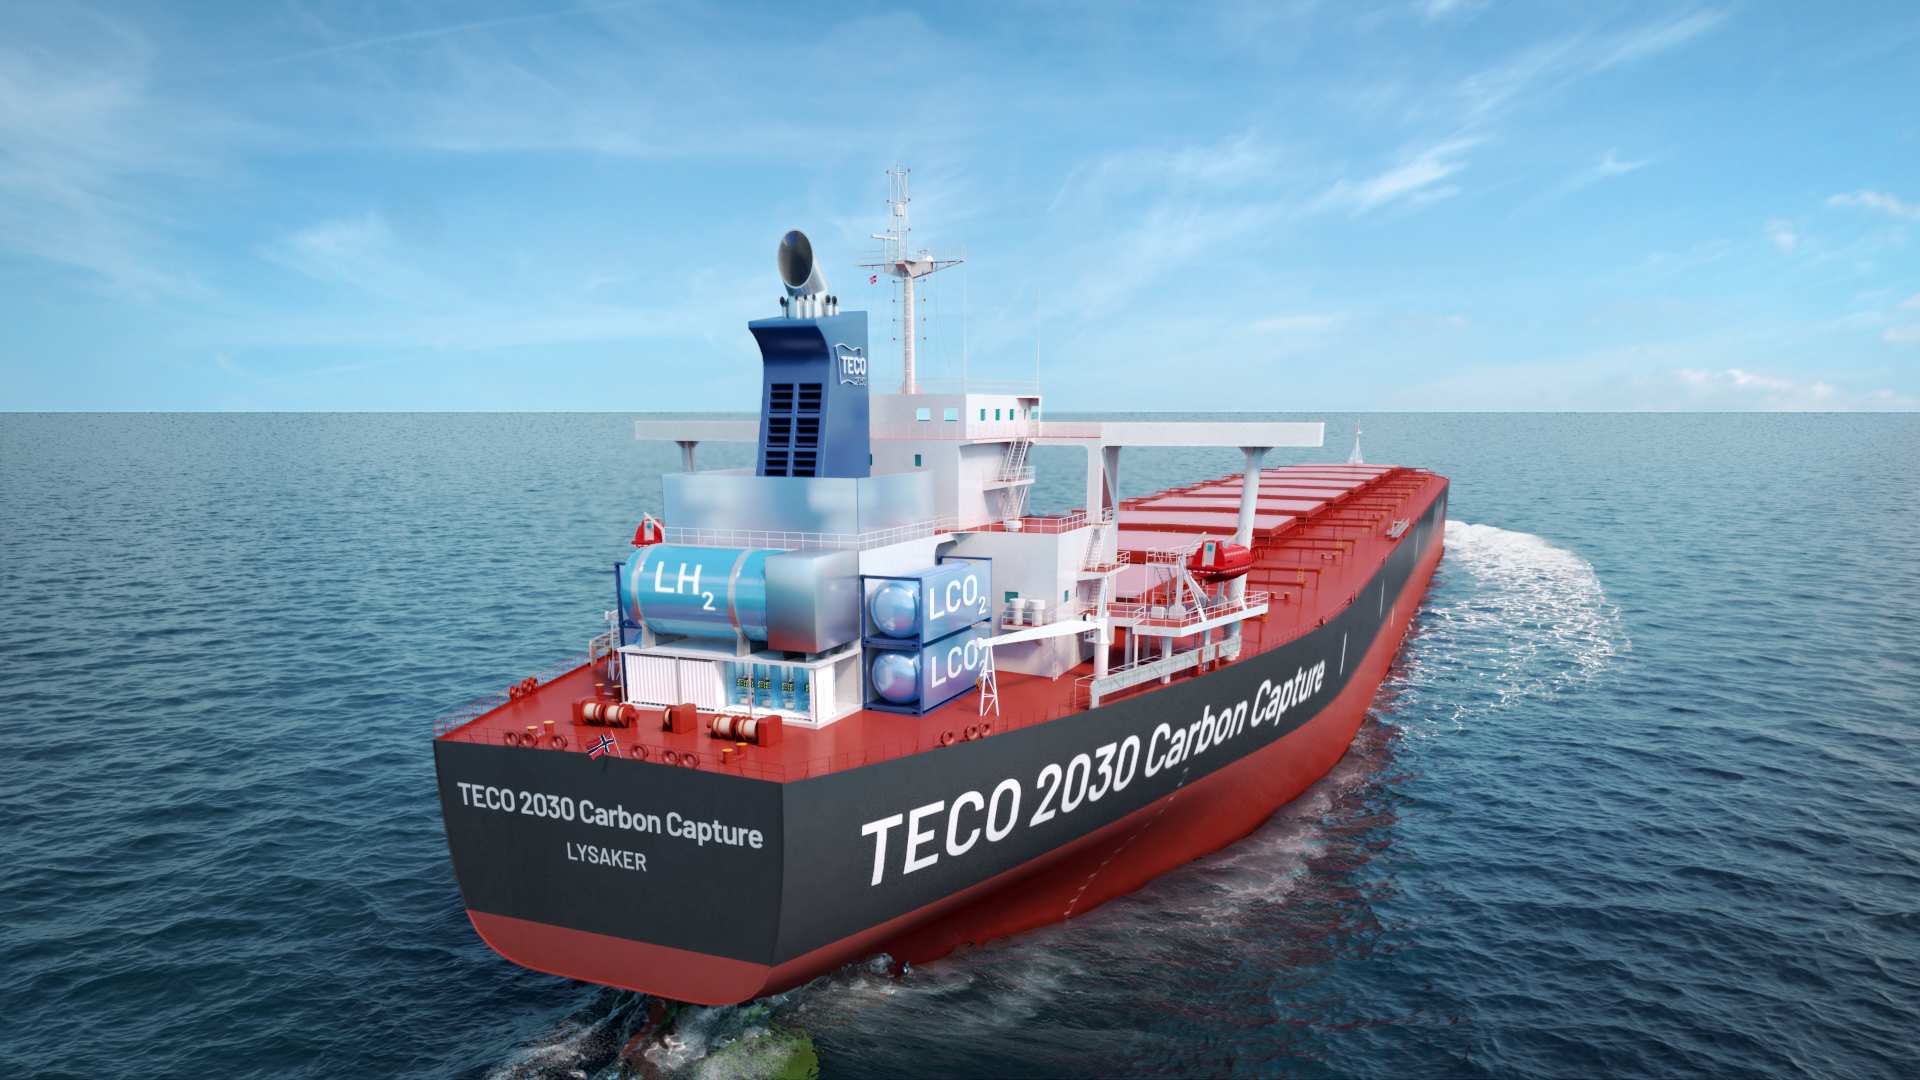 TECO 2030 ASA and Chart Industries, Inc. will jointly develop technological solutions that will capture CO₂ emitted by ships and subsequently store it in liquid form.